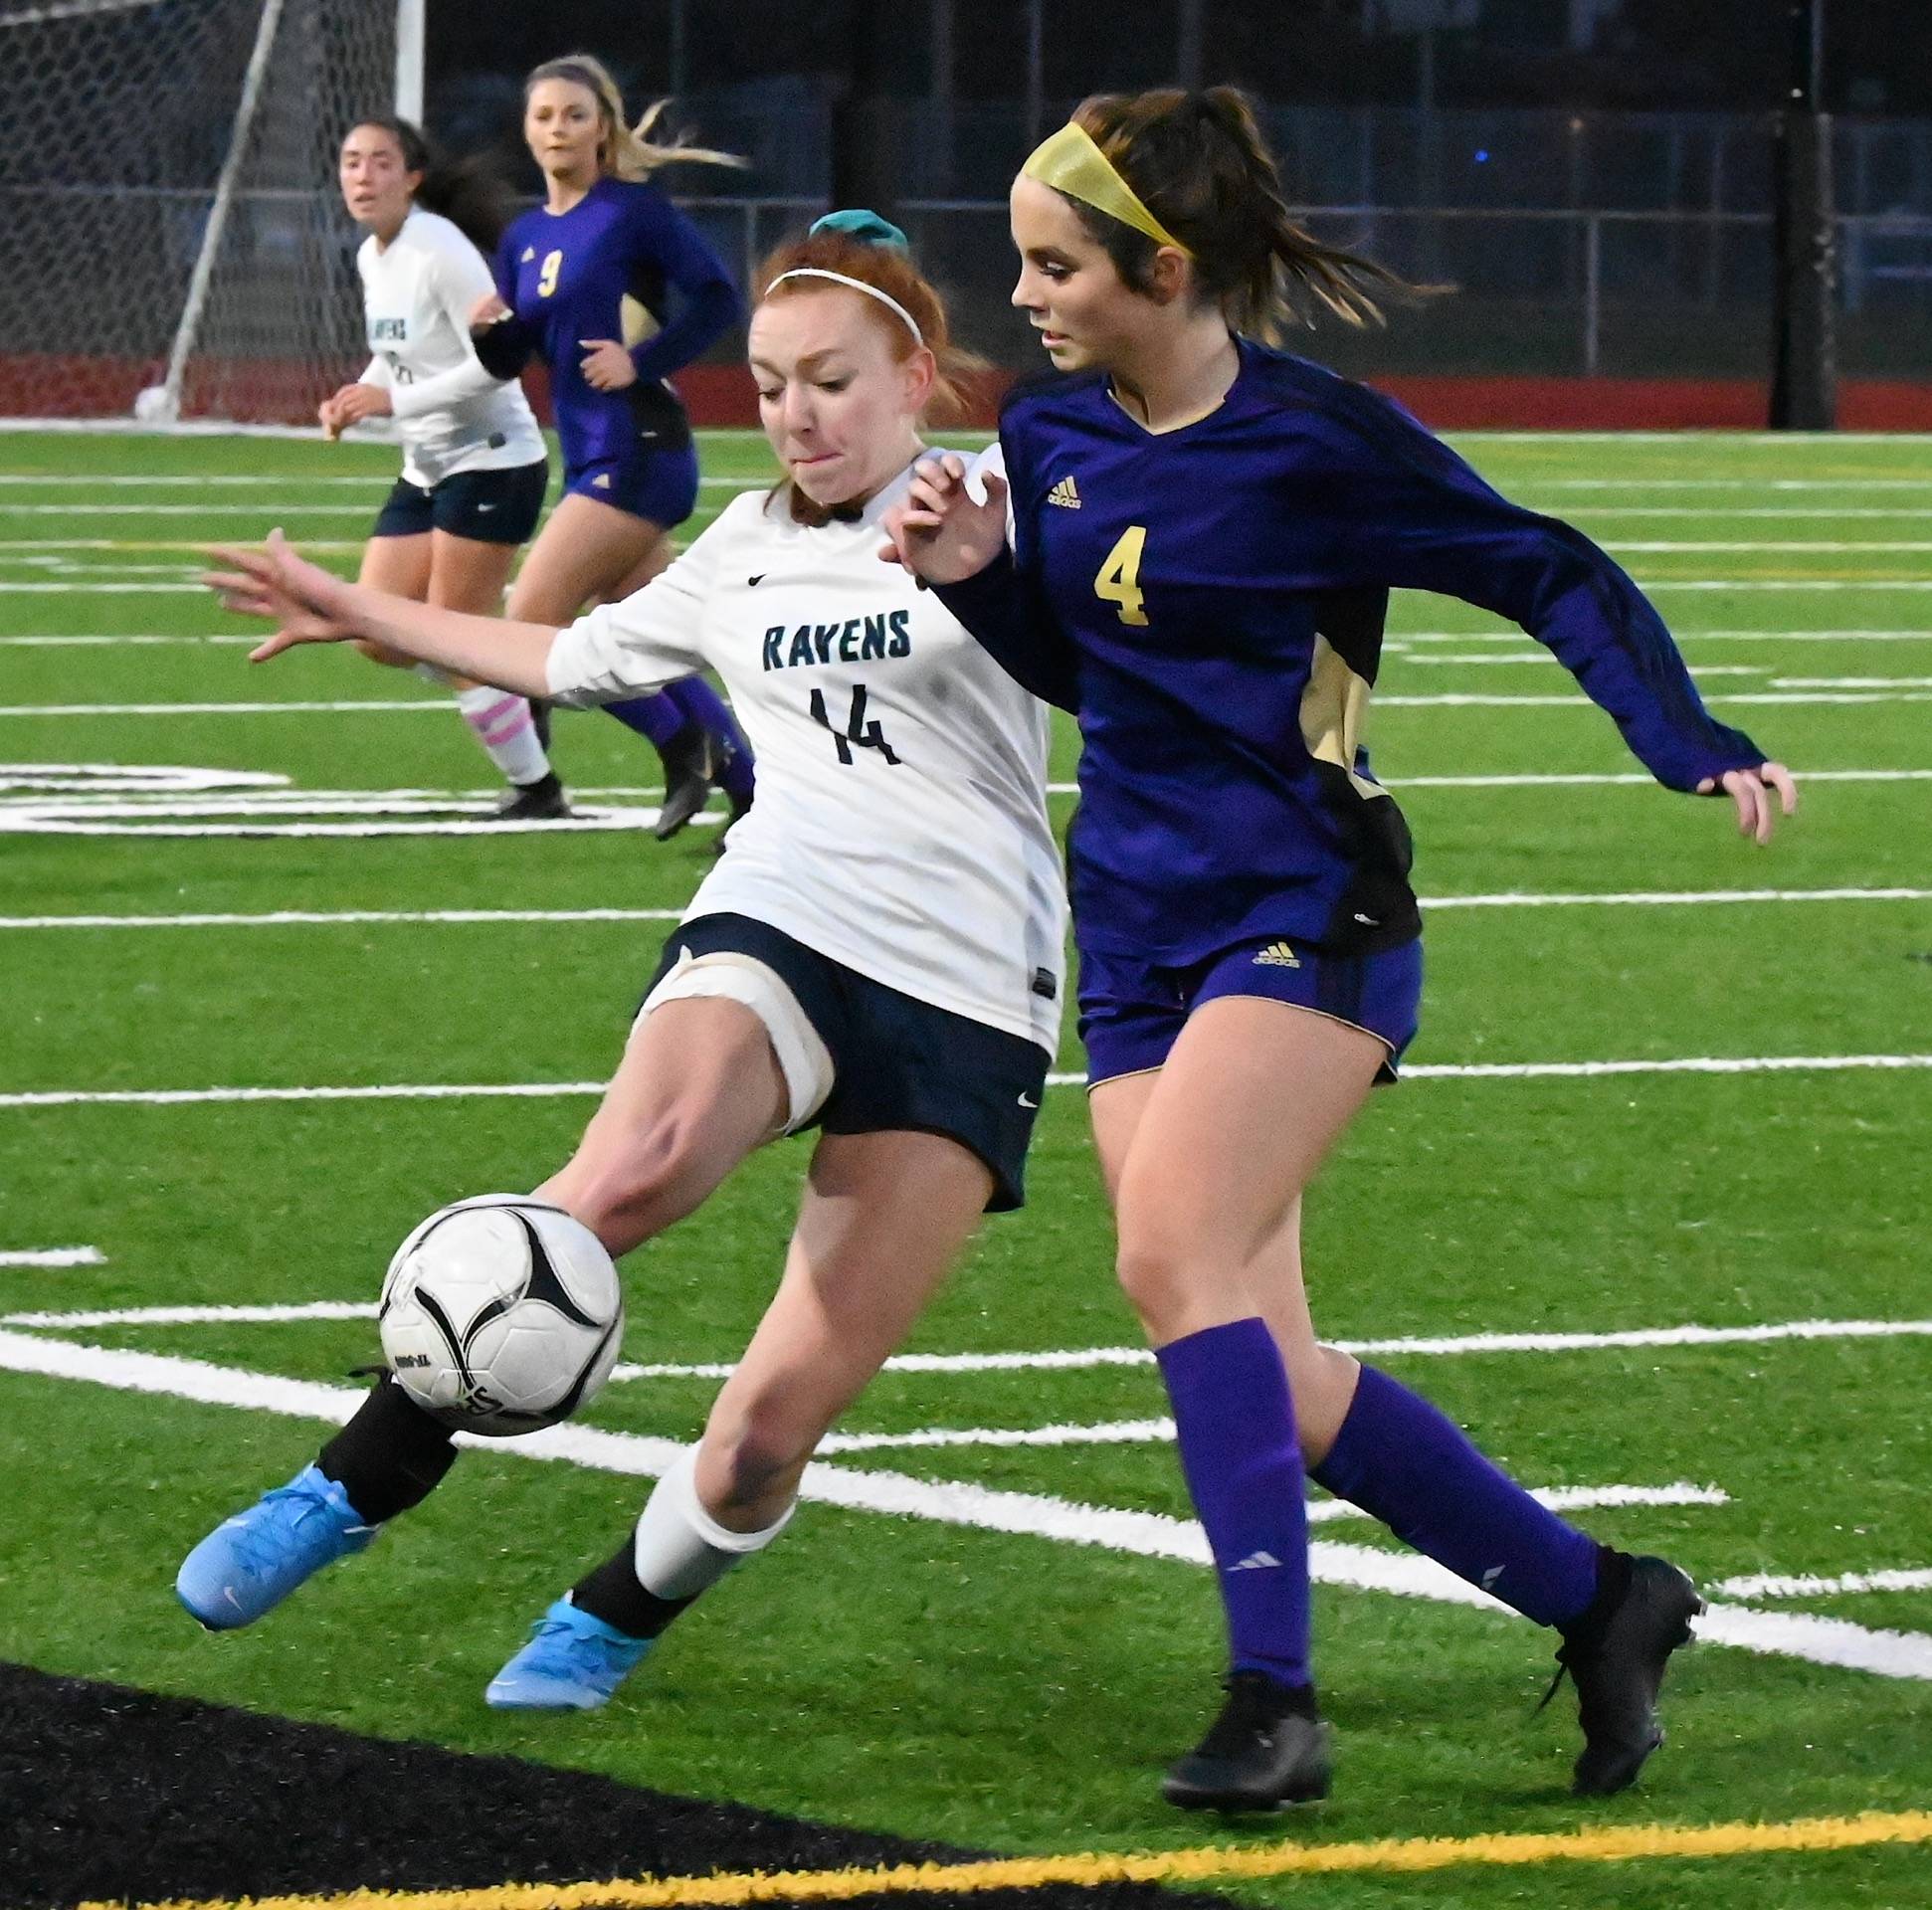 Auburn Riverside’s Sydney Wate advances the ball as Puyallup’s Kaelee Huetten defends during the 4A state championship match Saturday. RACHEL CIAMPI, Auburn Reporter